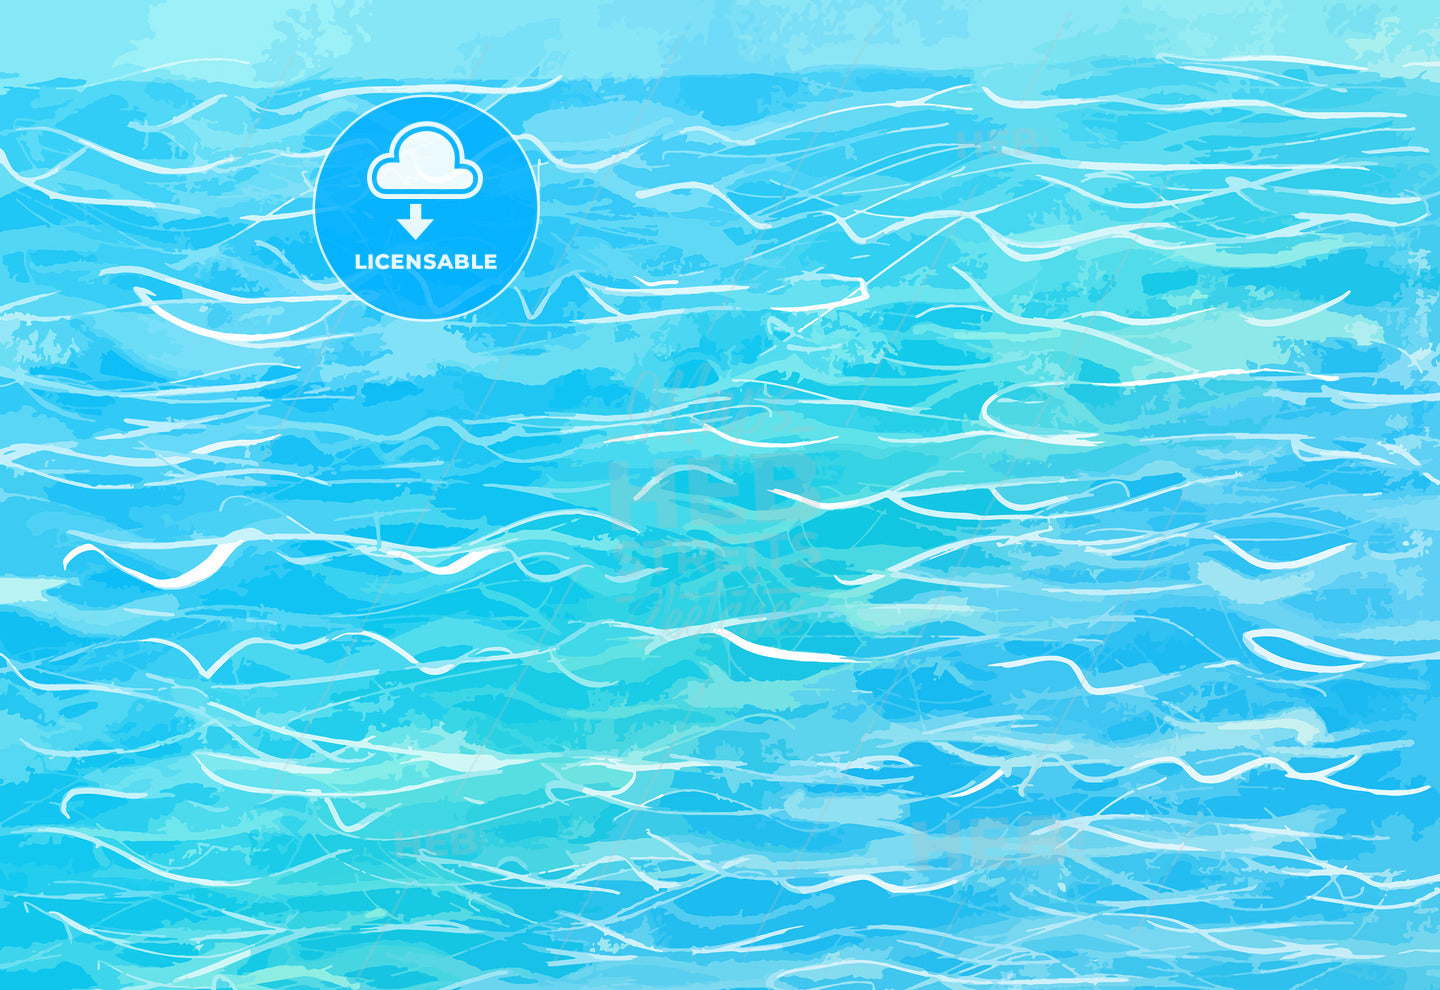 hand-drawn blue water background – instant download